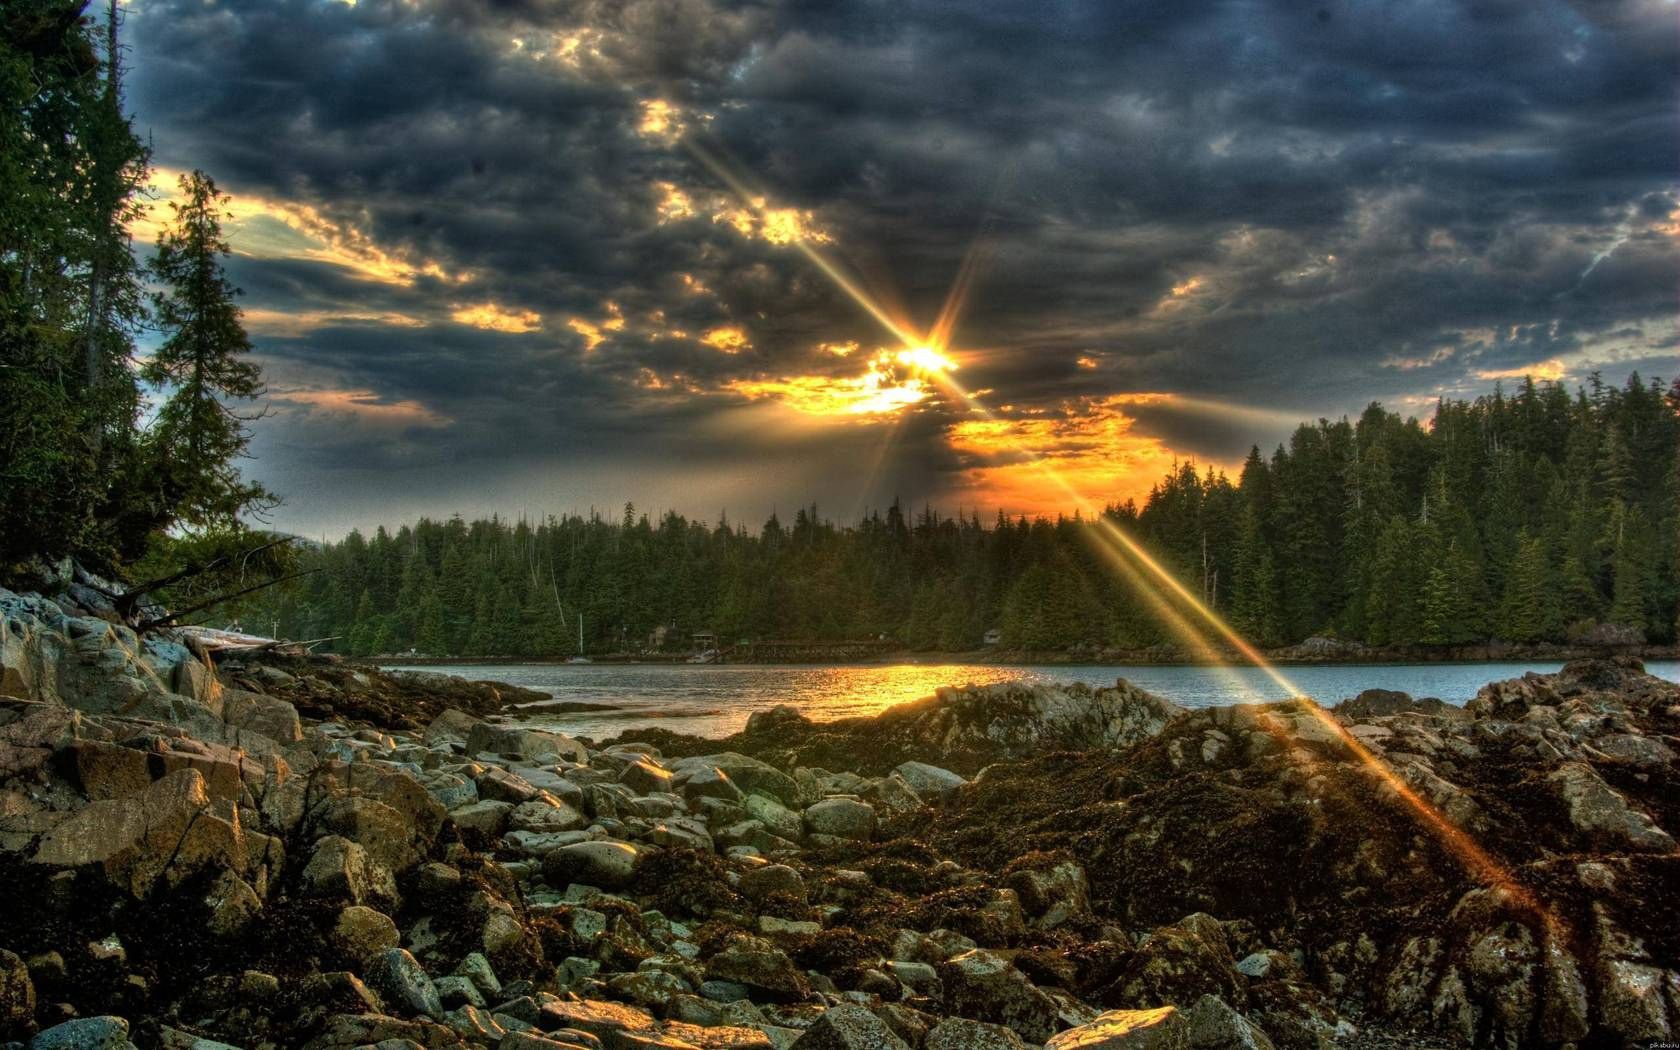 mainly cloudy, overcast, stones, nature, sun, clouds, lake, beams, rays, forest, evening images